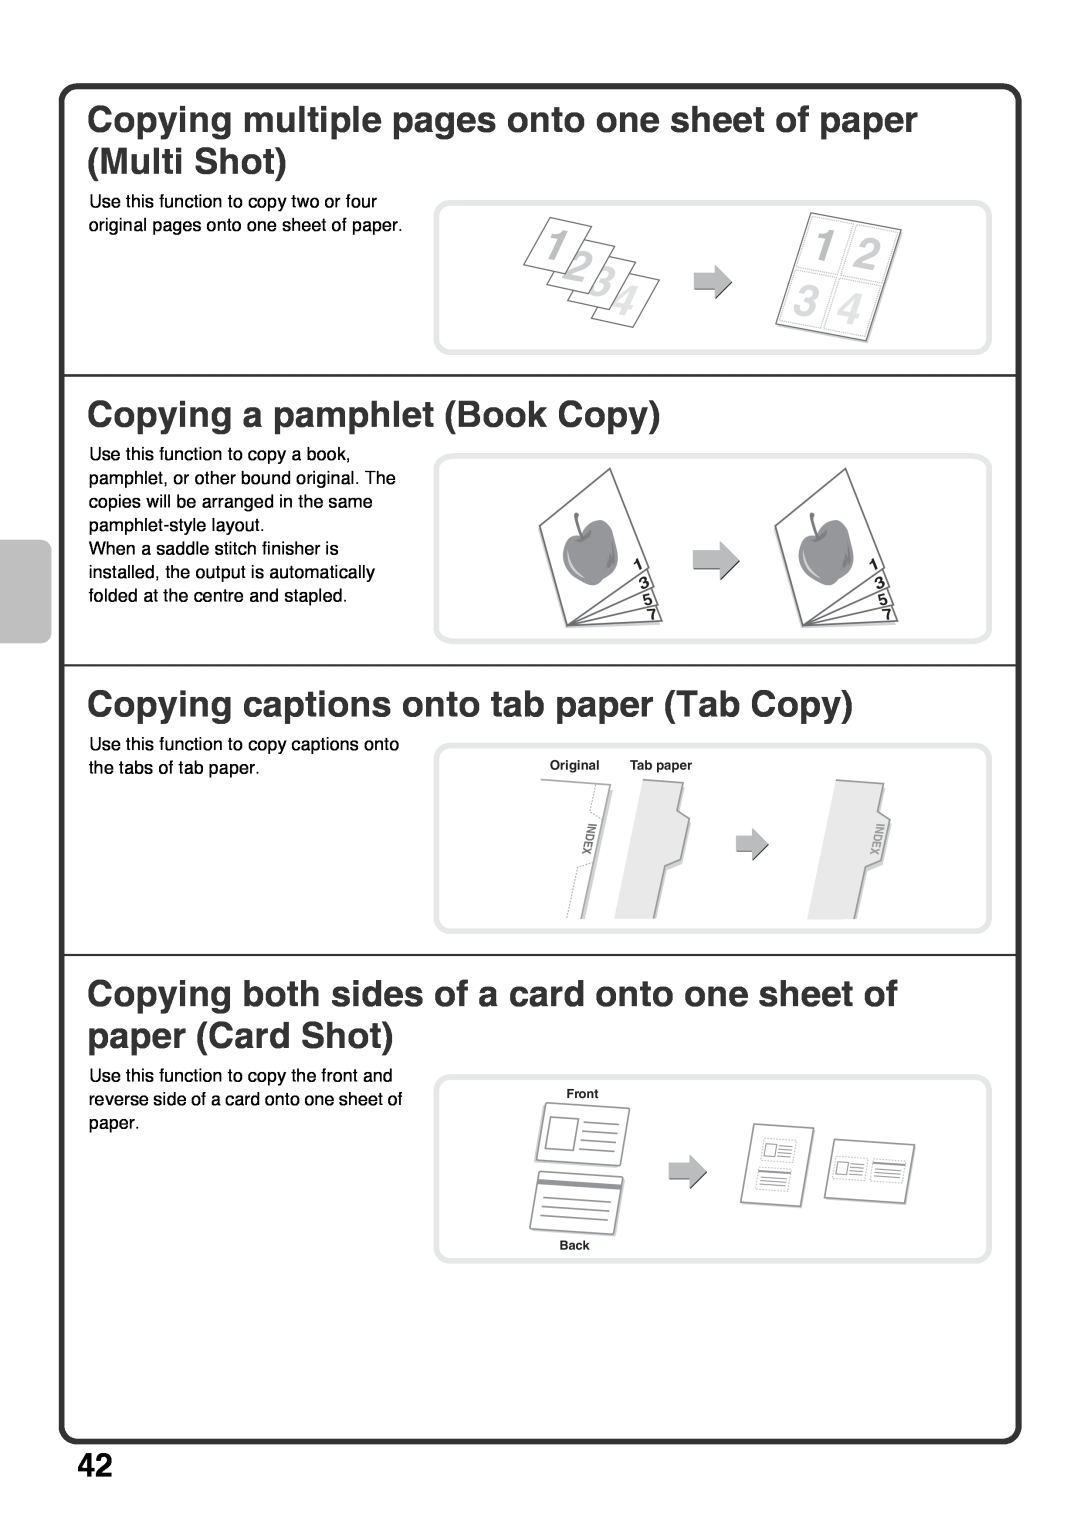 Sharp MX-4100N, MX-5000N, MX-4101N Copying multiple pages onto one sheet of paper Multi Shot, Copying a pamphlet Book Copy 